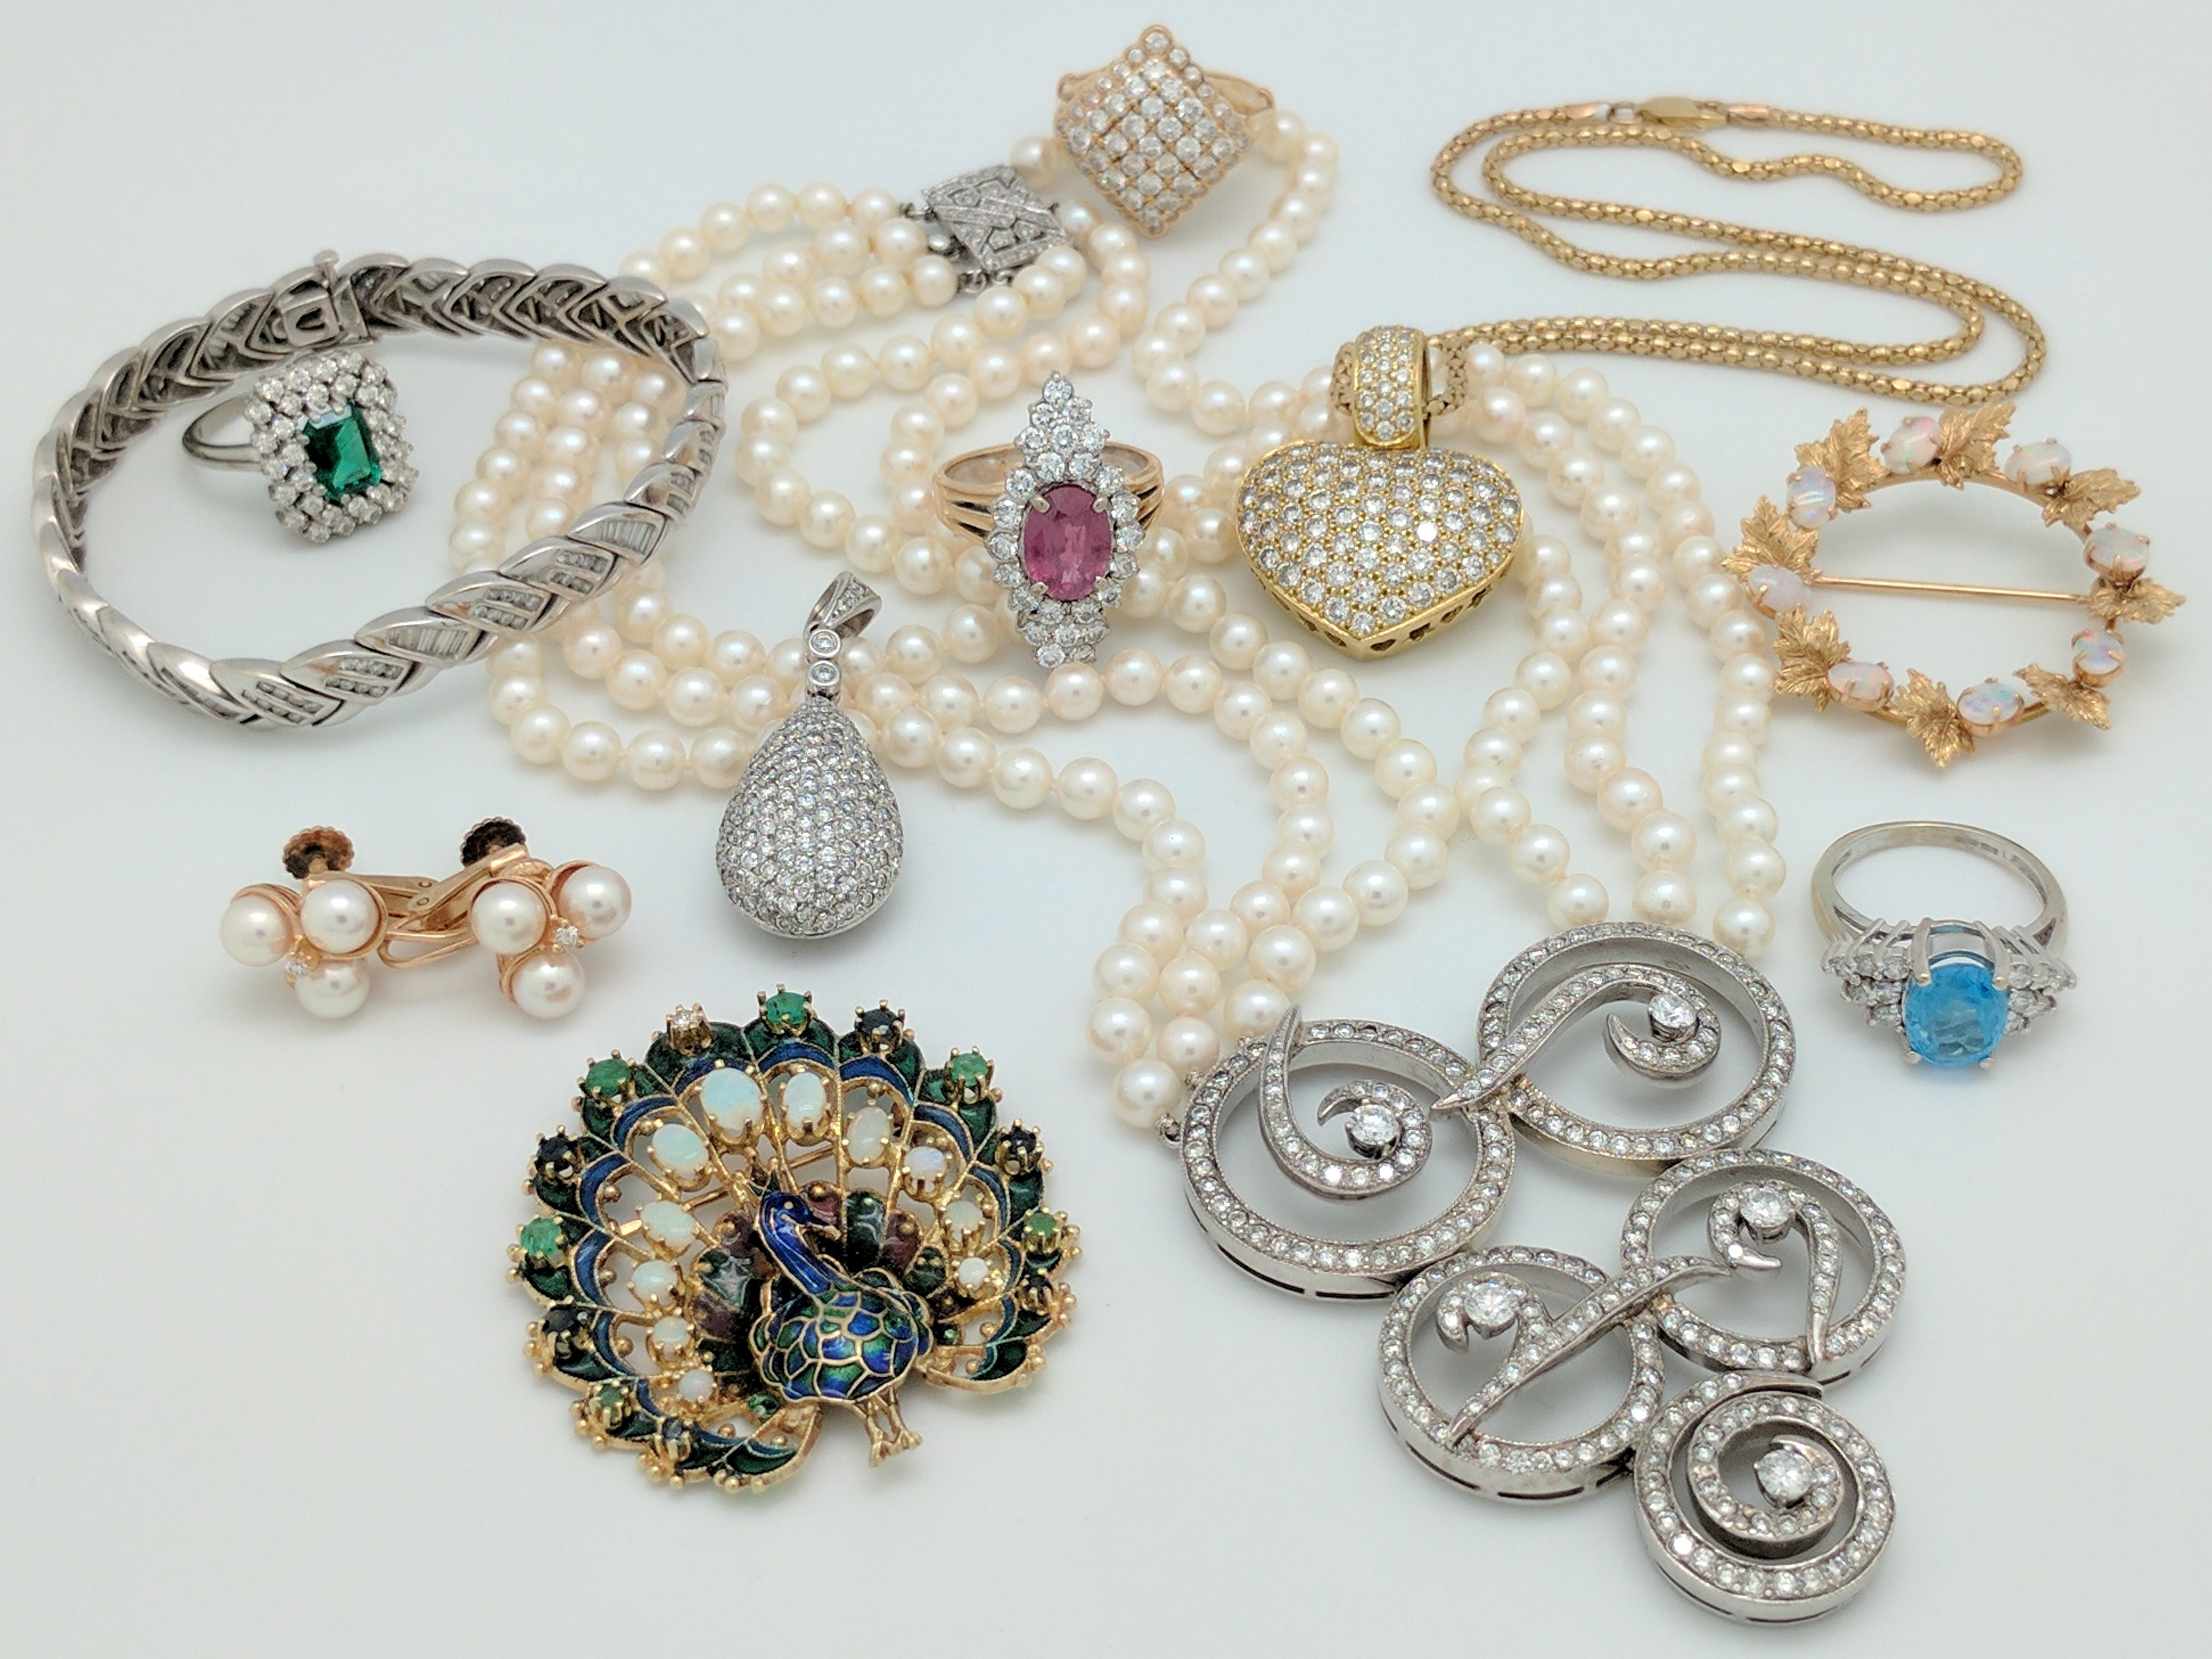 An assortment of jewelry, ranging from pearls to diamonds